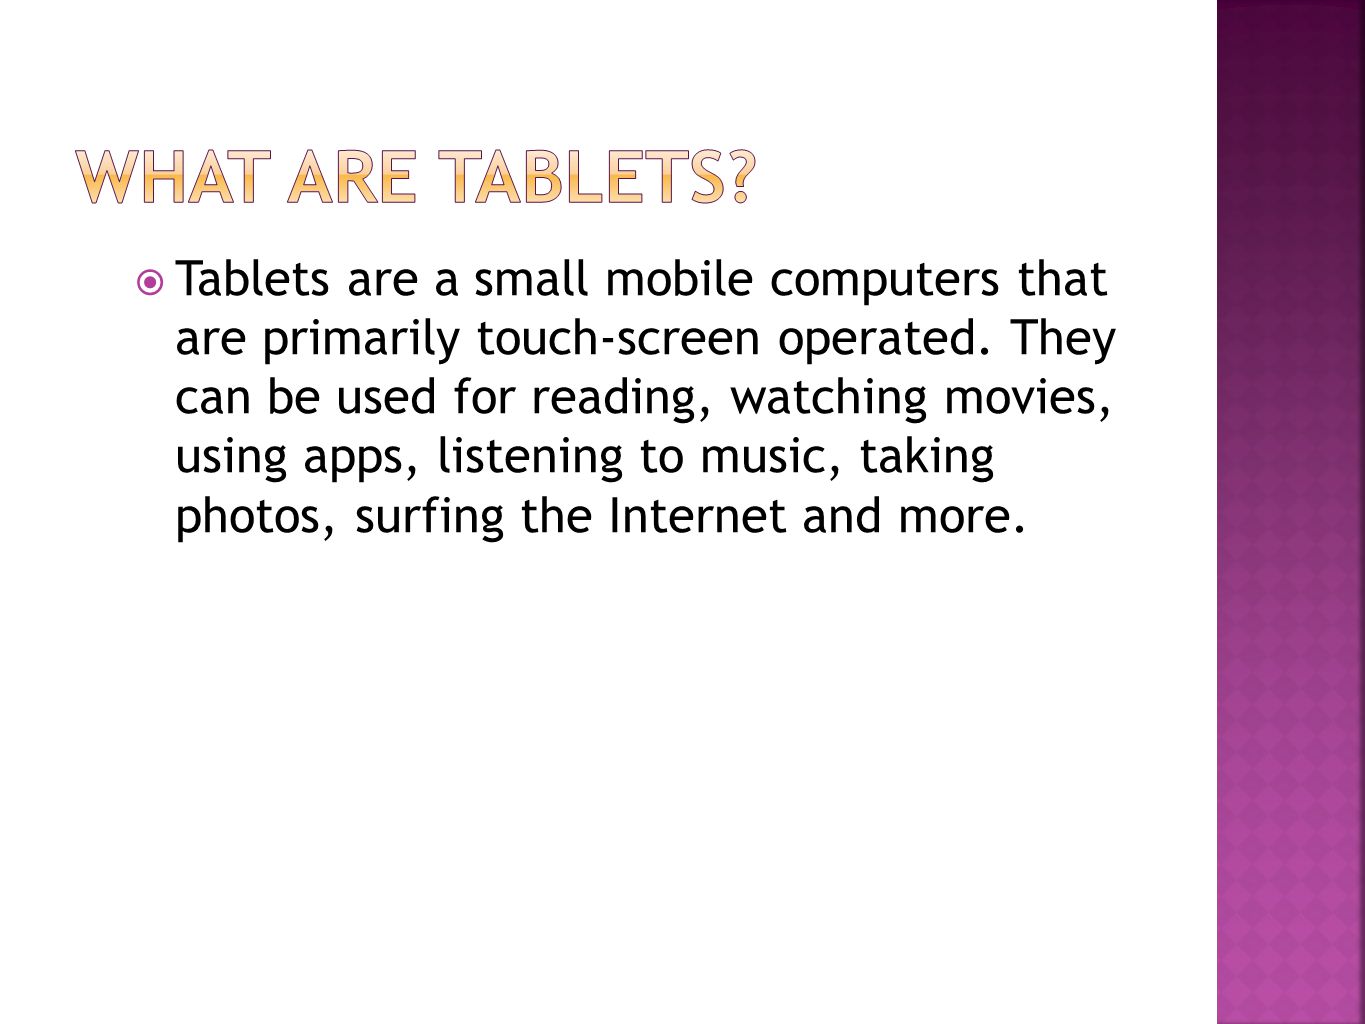  Tablets are a small mobile computers that are primarily touch-screen operated.